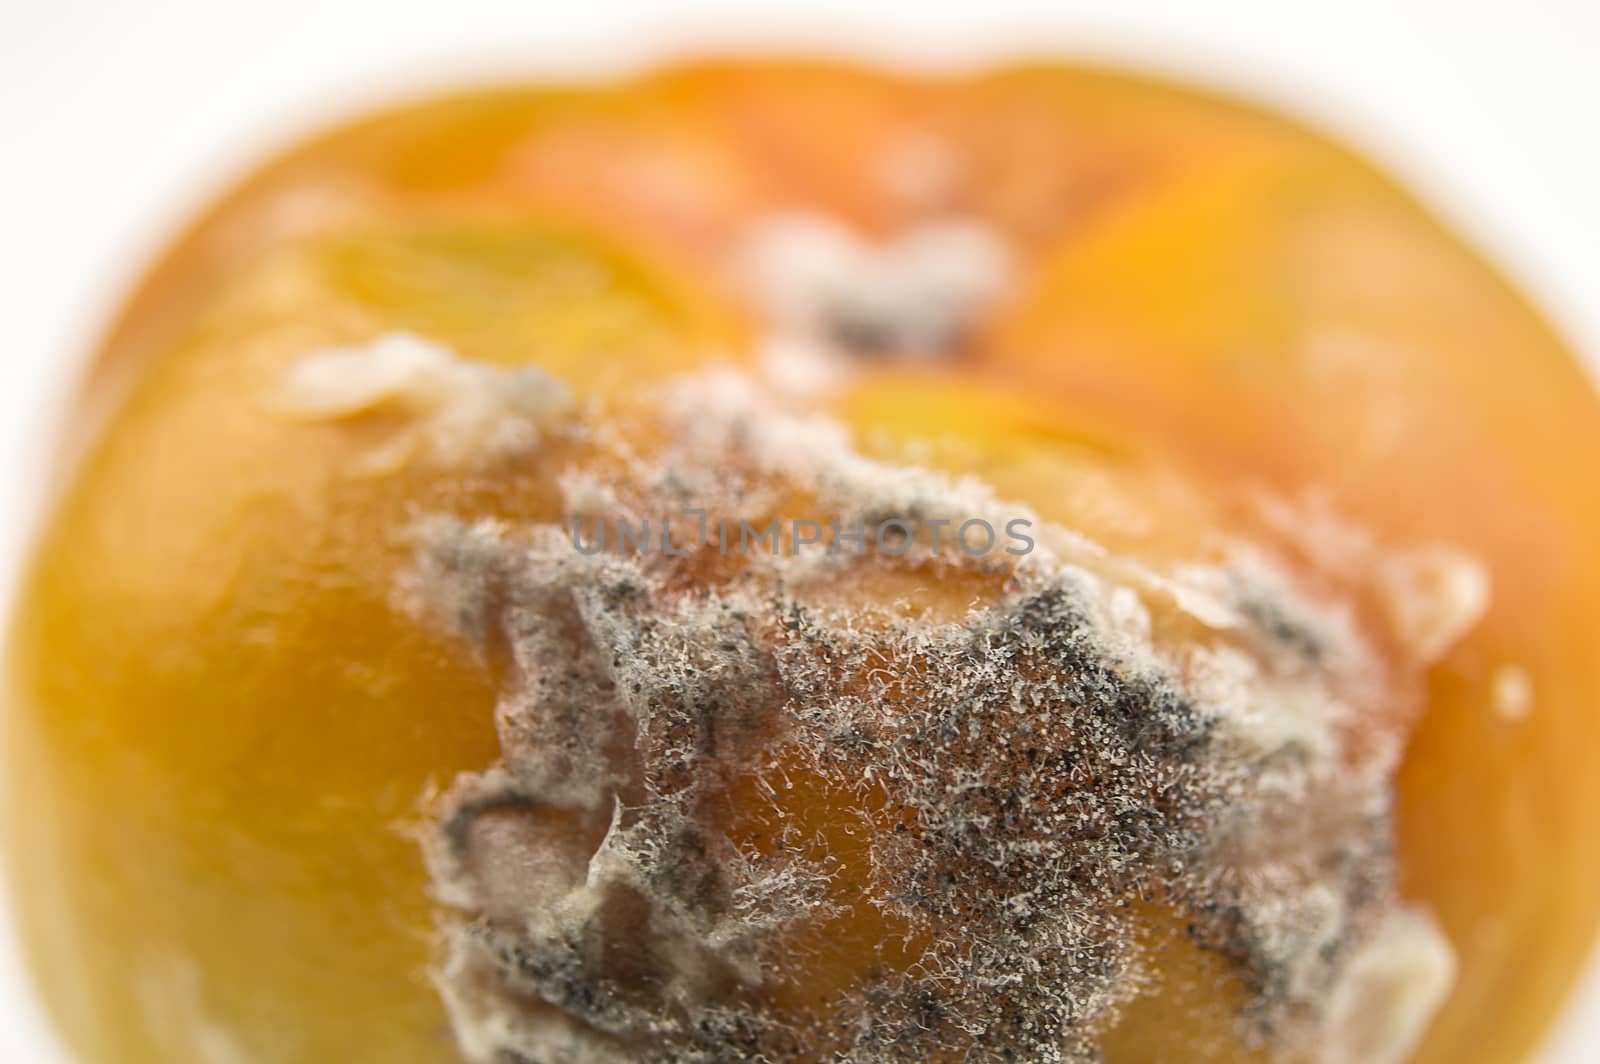 Tomato with fungal growth on macro view